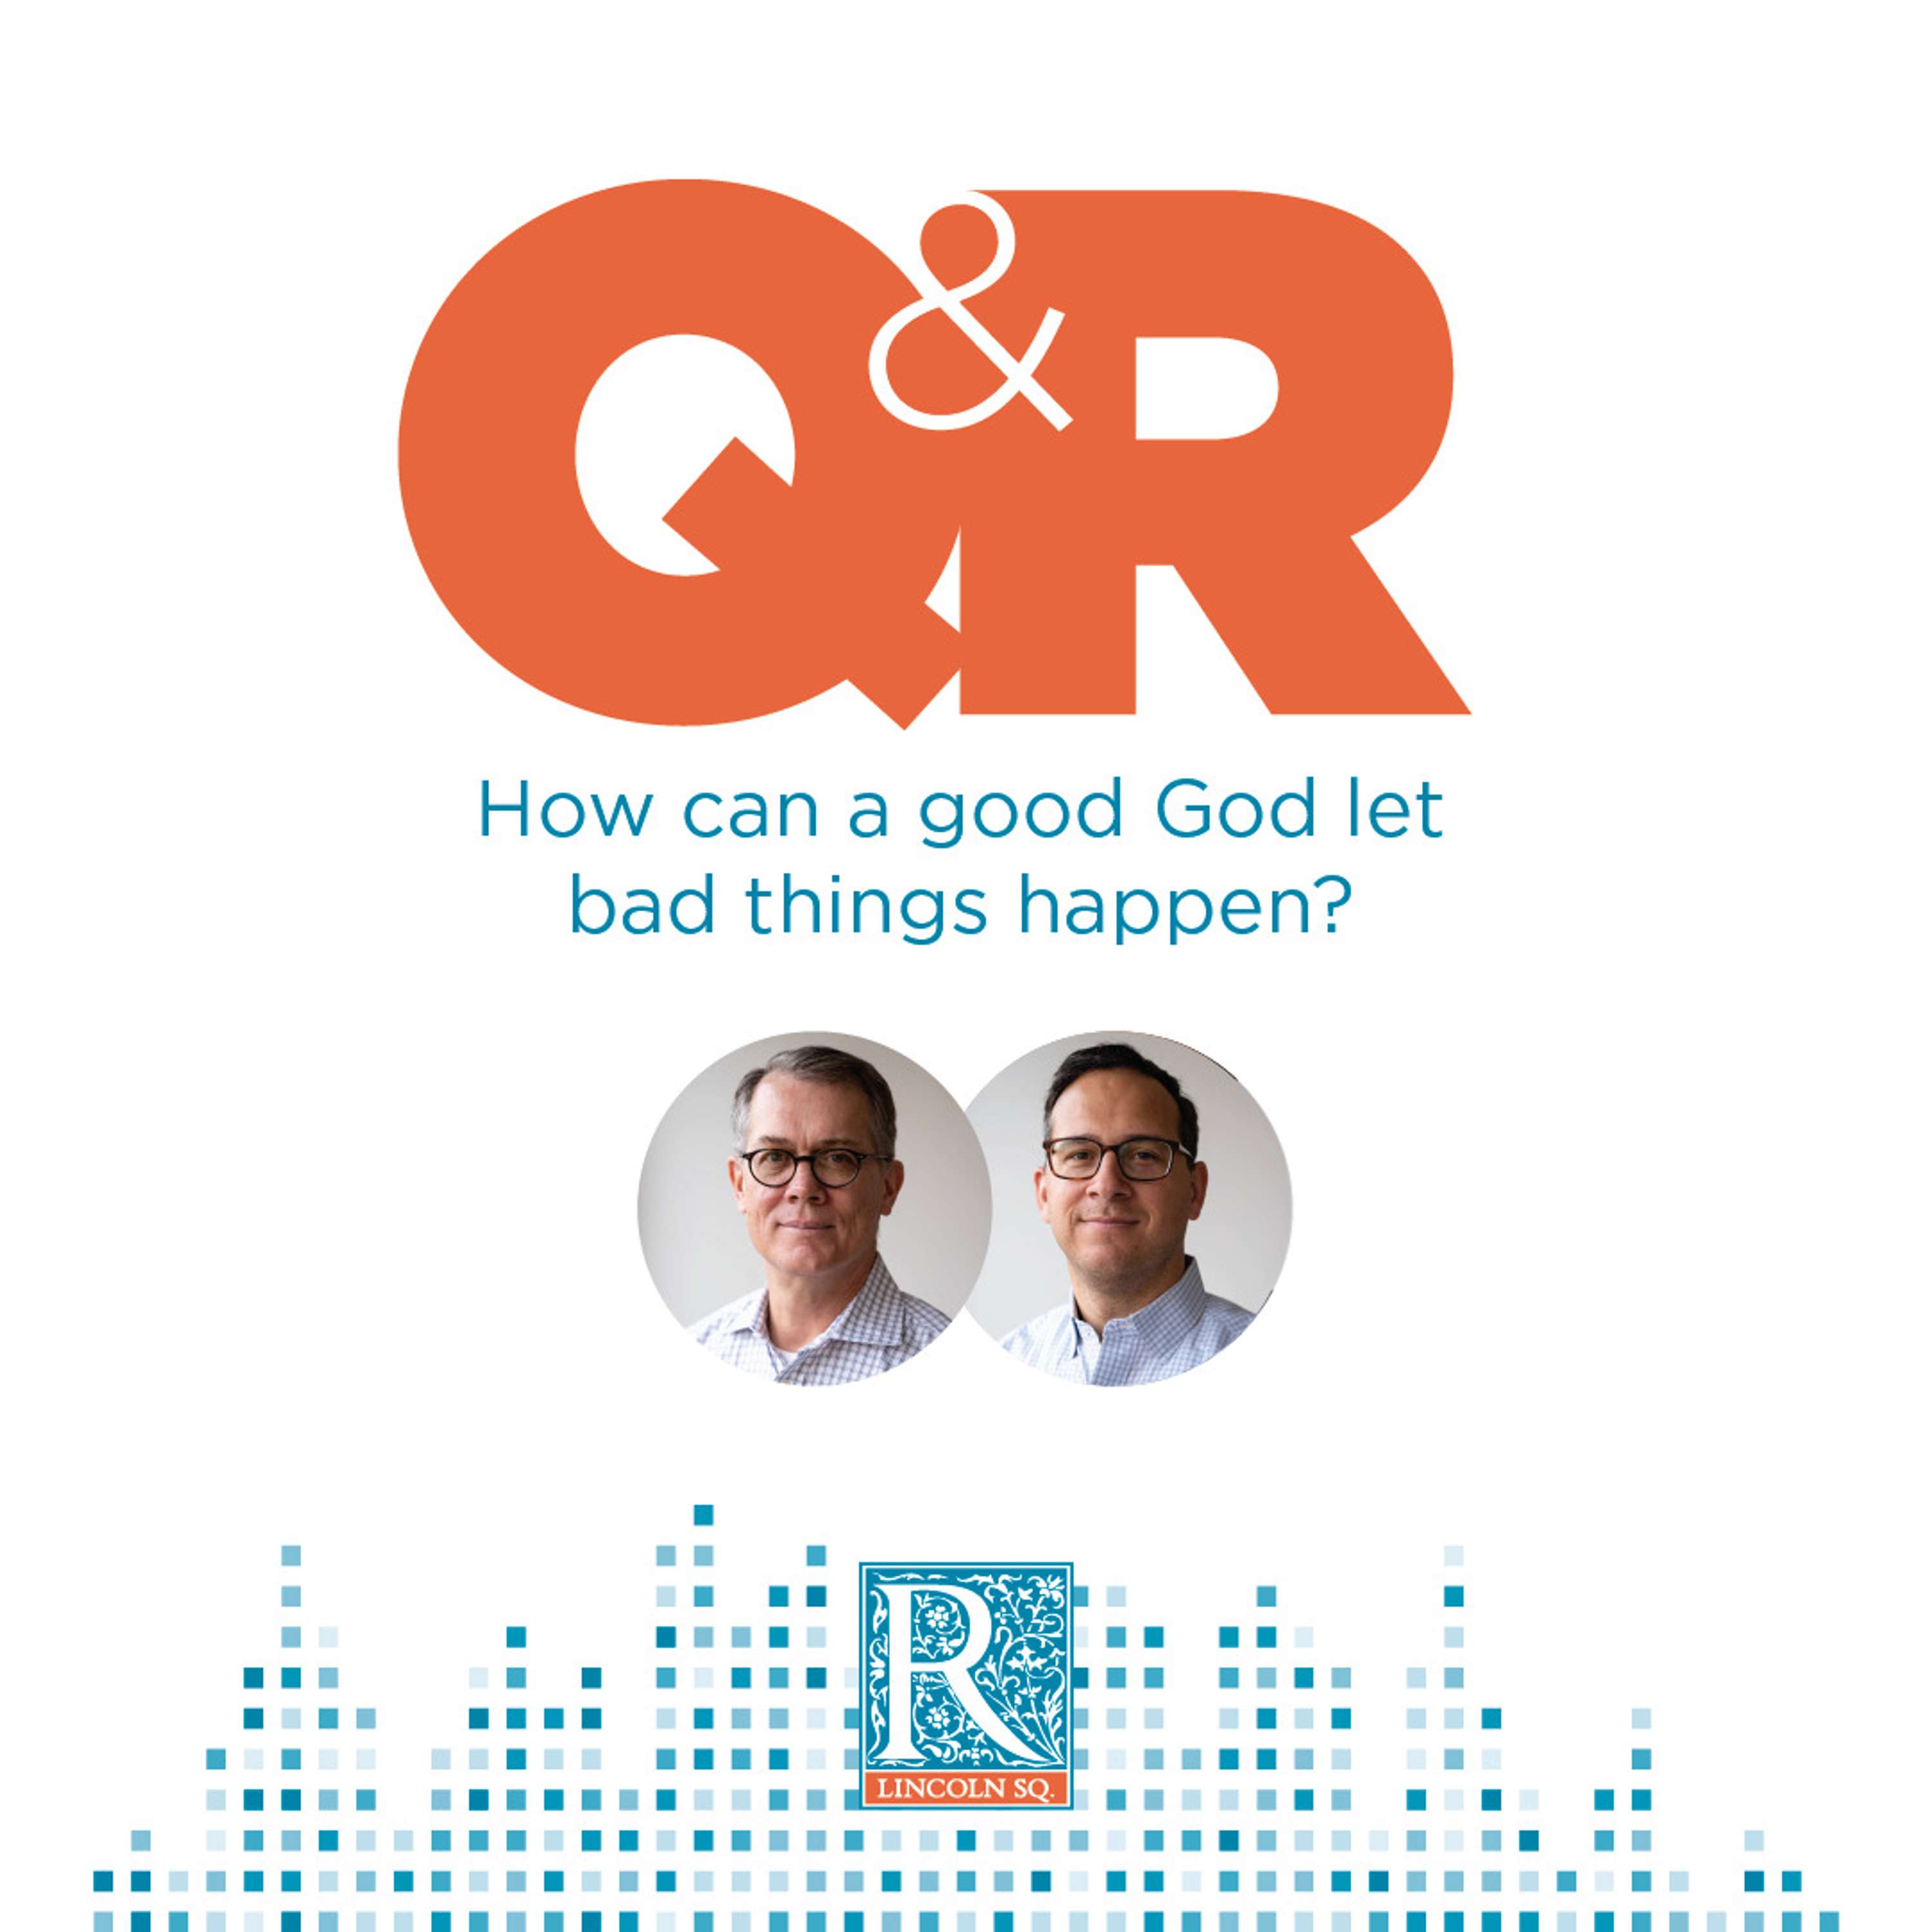 How can a good God let bad things happen?